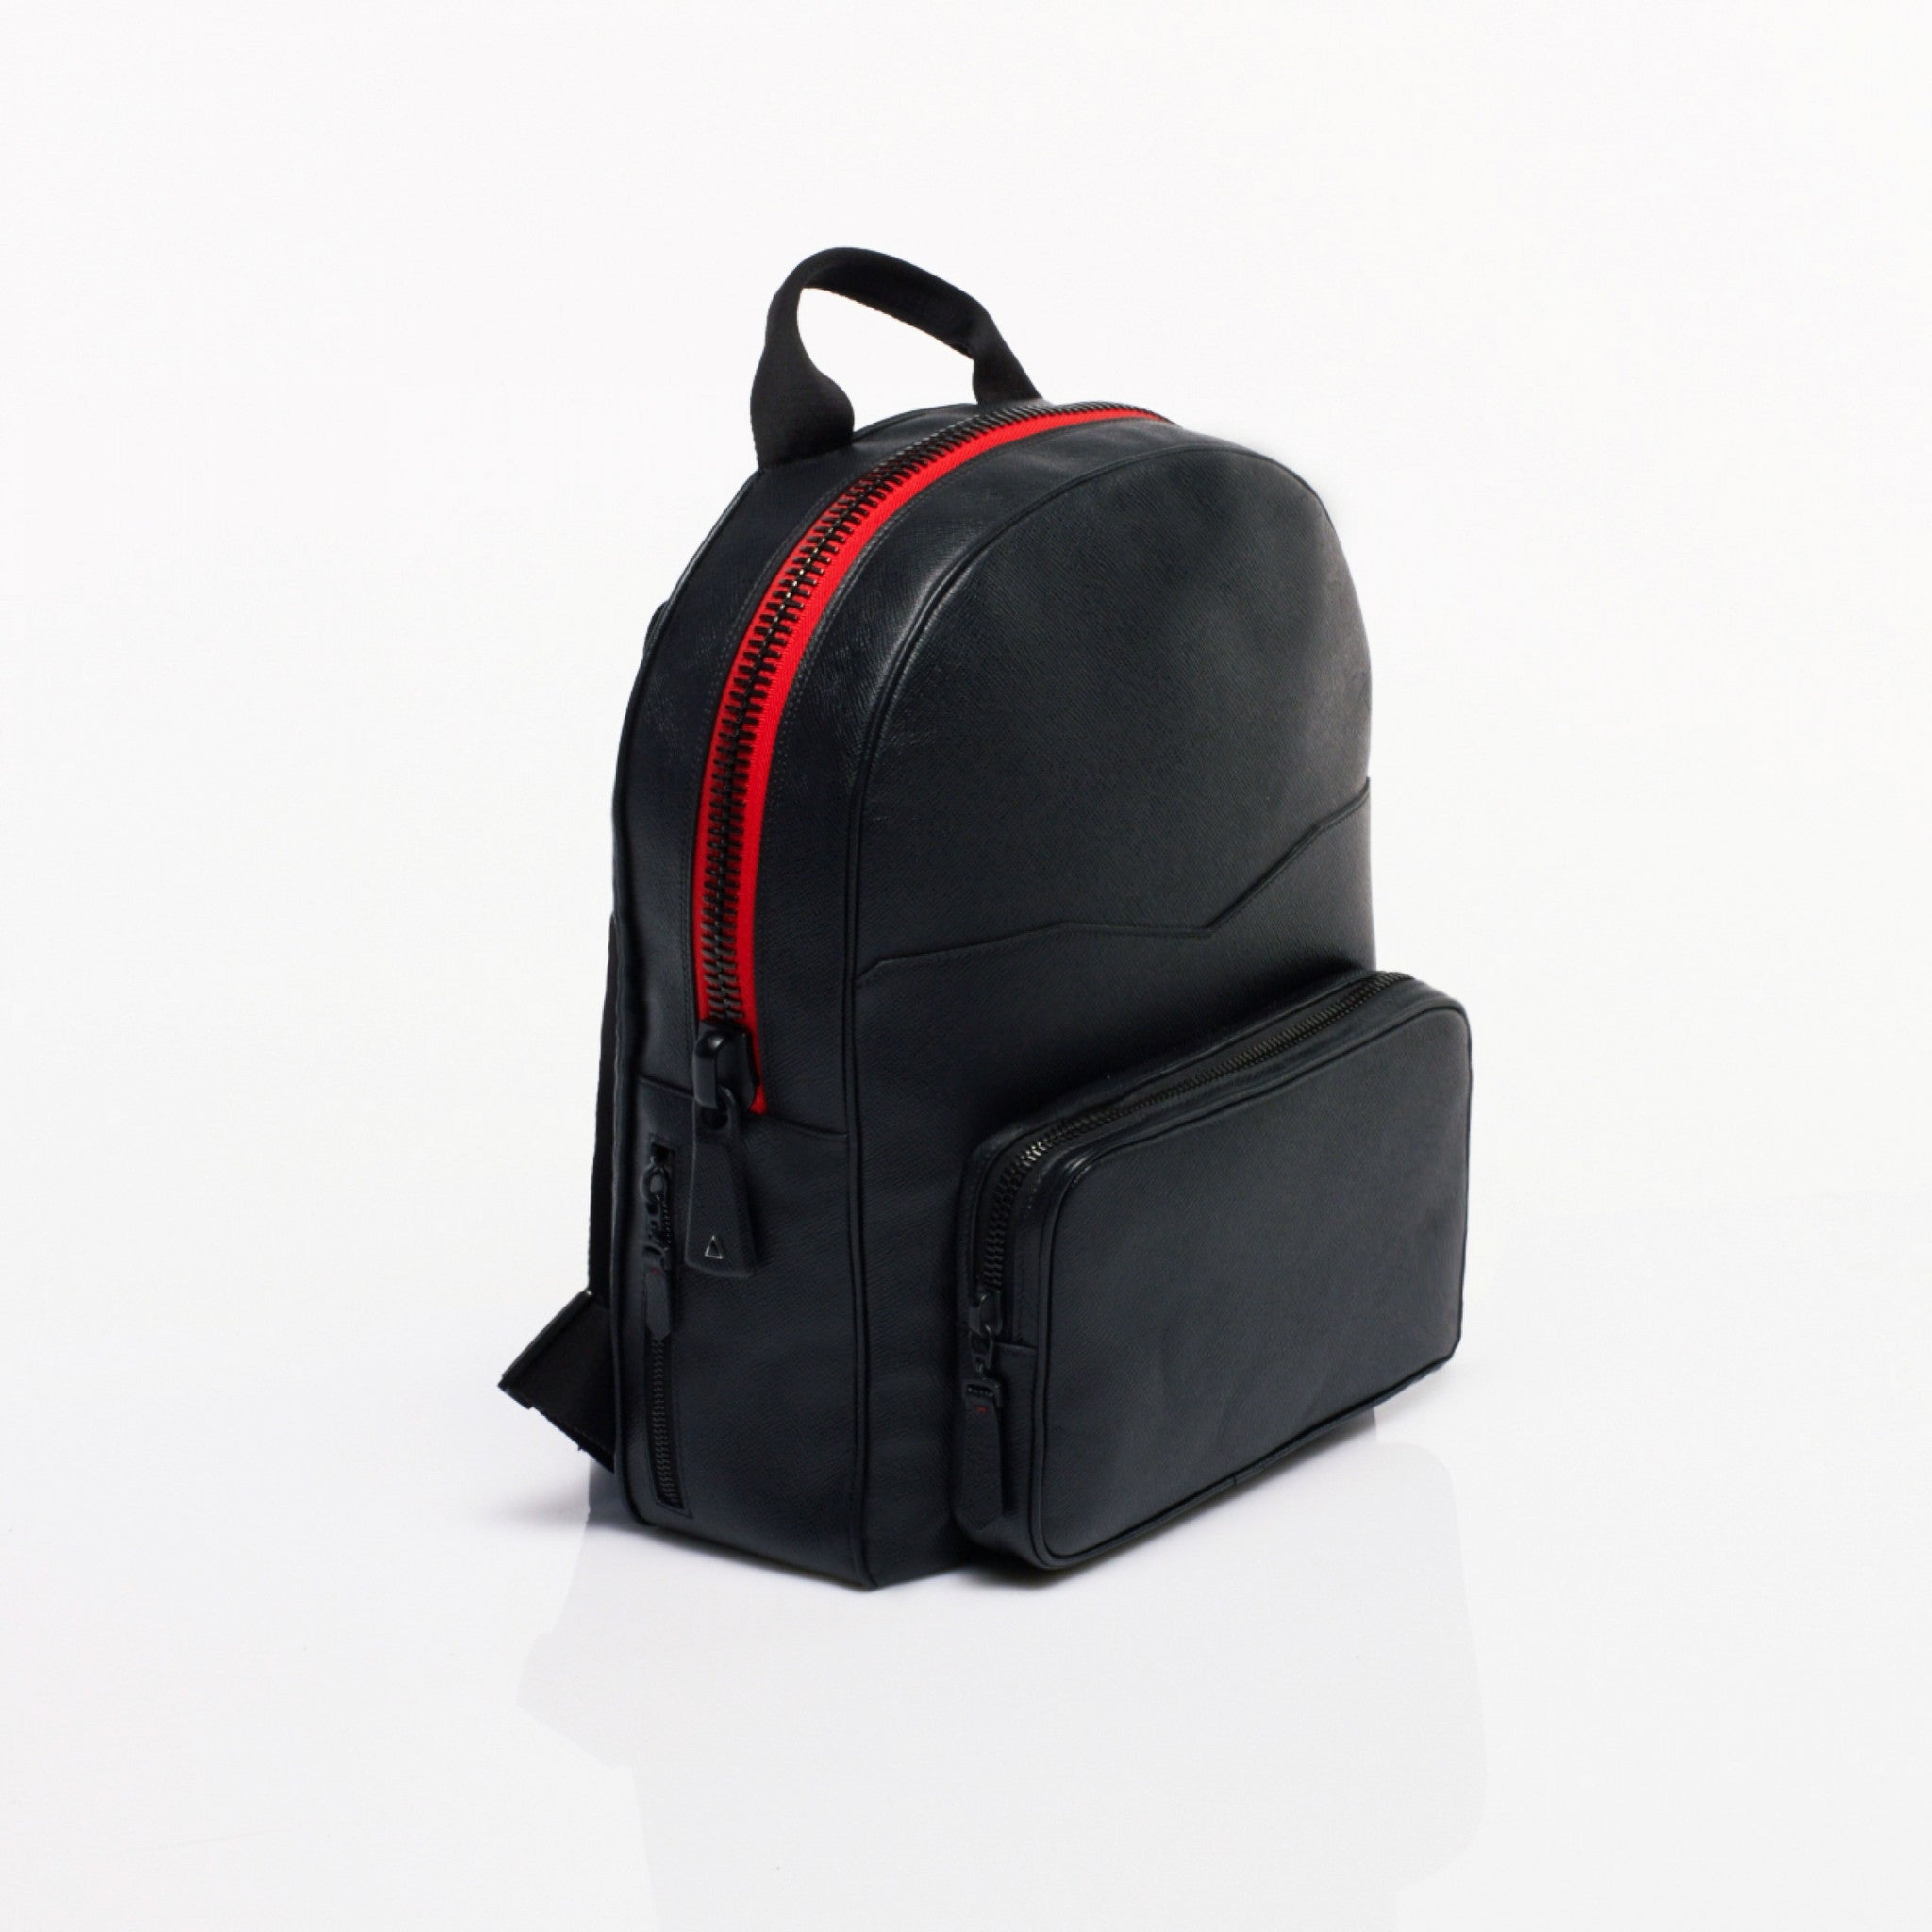 Looking for specific backpack- made in france- anyone have a